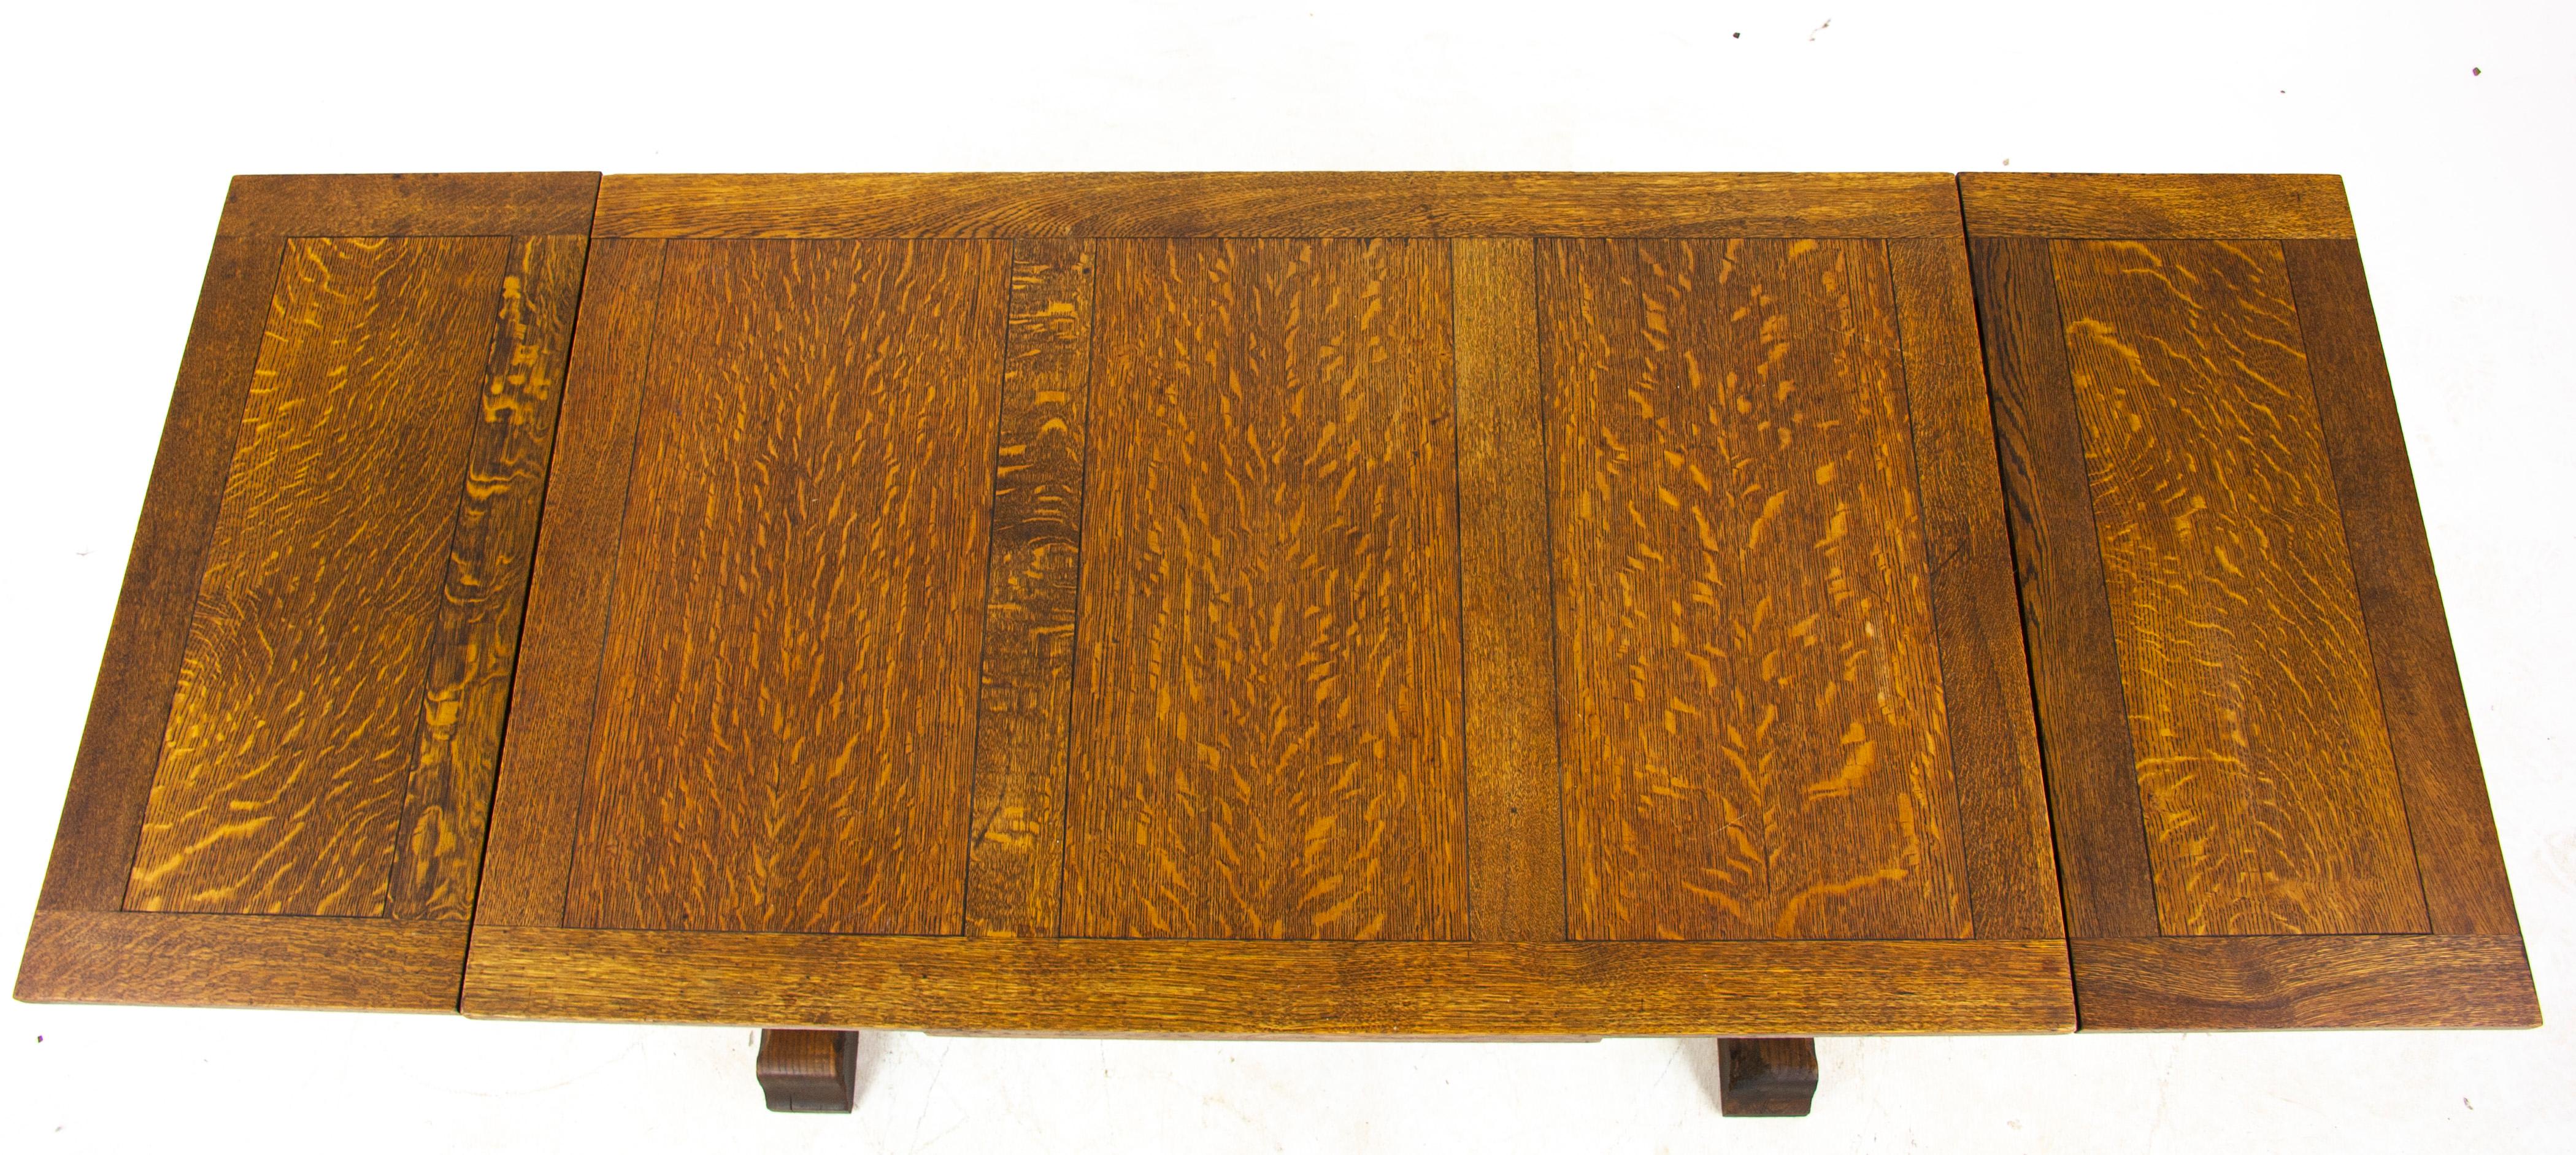 Hand-Crafted Antique Oak Table, Carved Tiger Oak Refectory Table, Scotland 1930, B1454